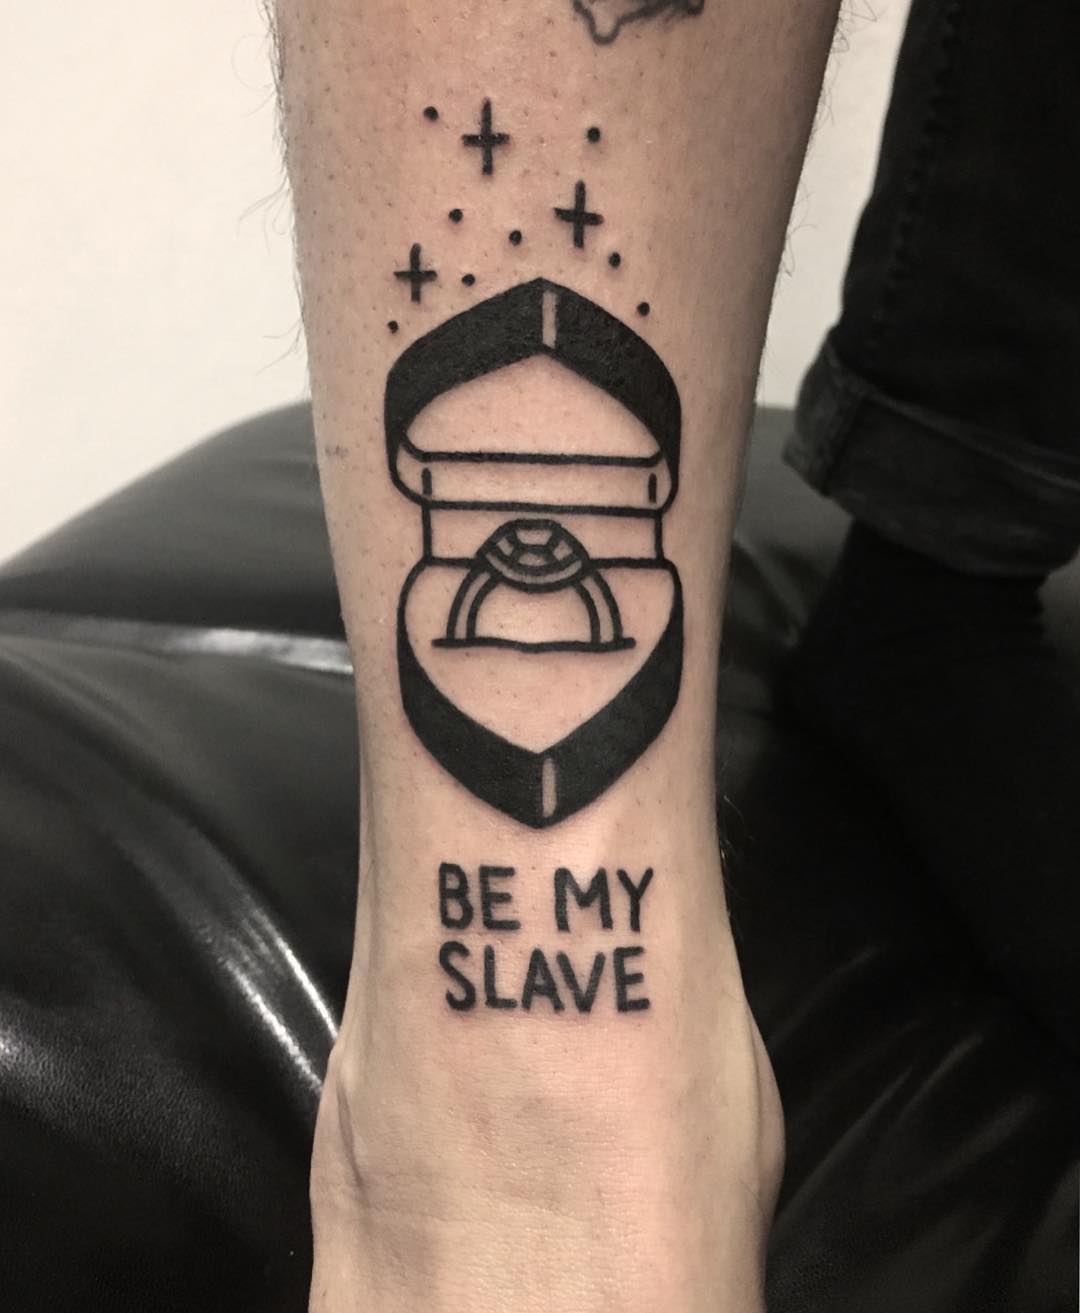 Be my slave tattoo by @themagicrosa